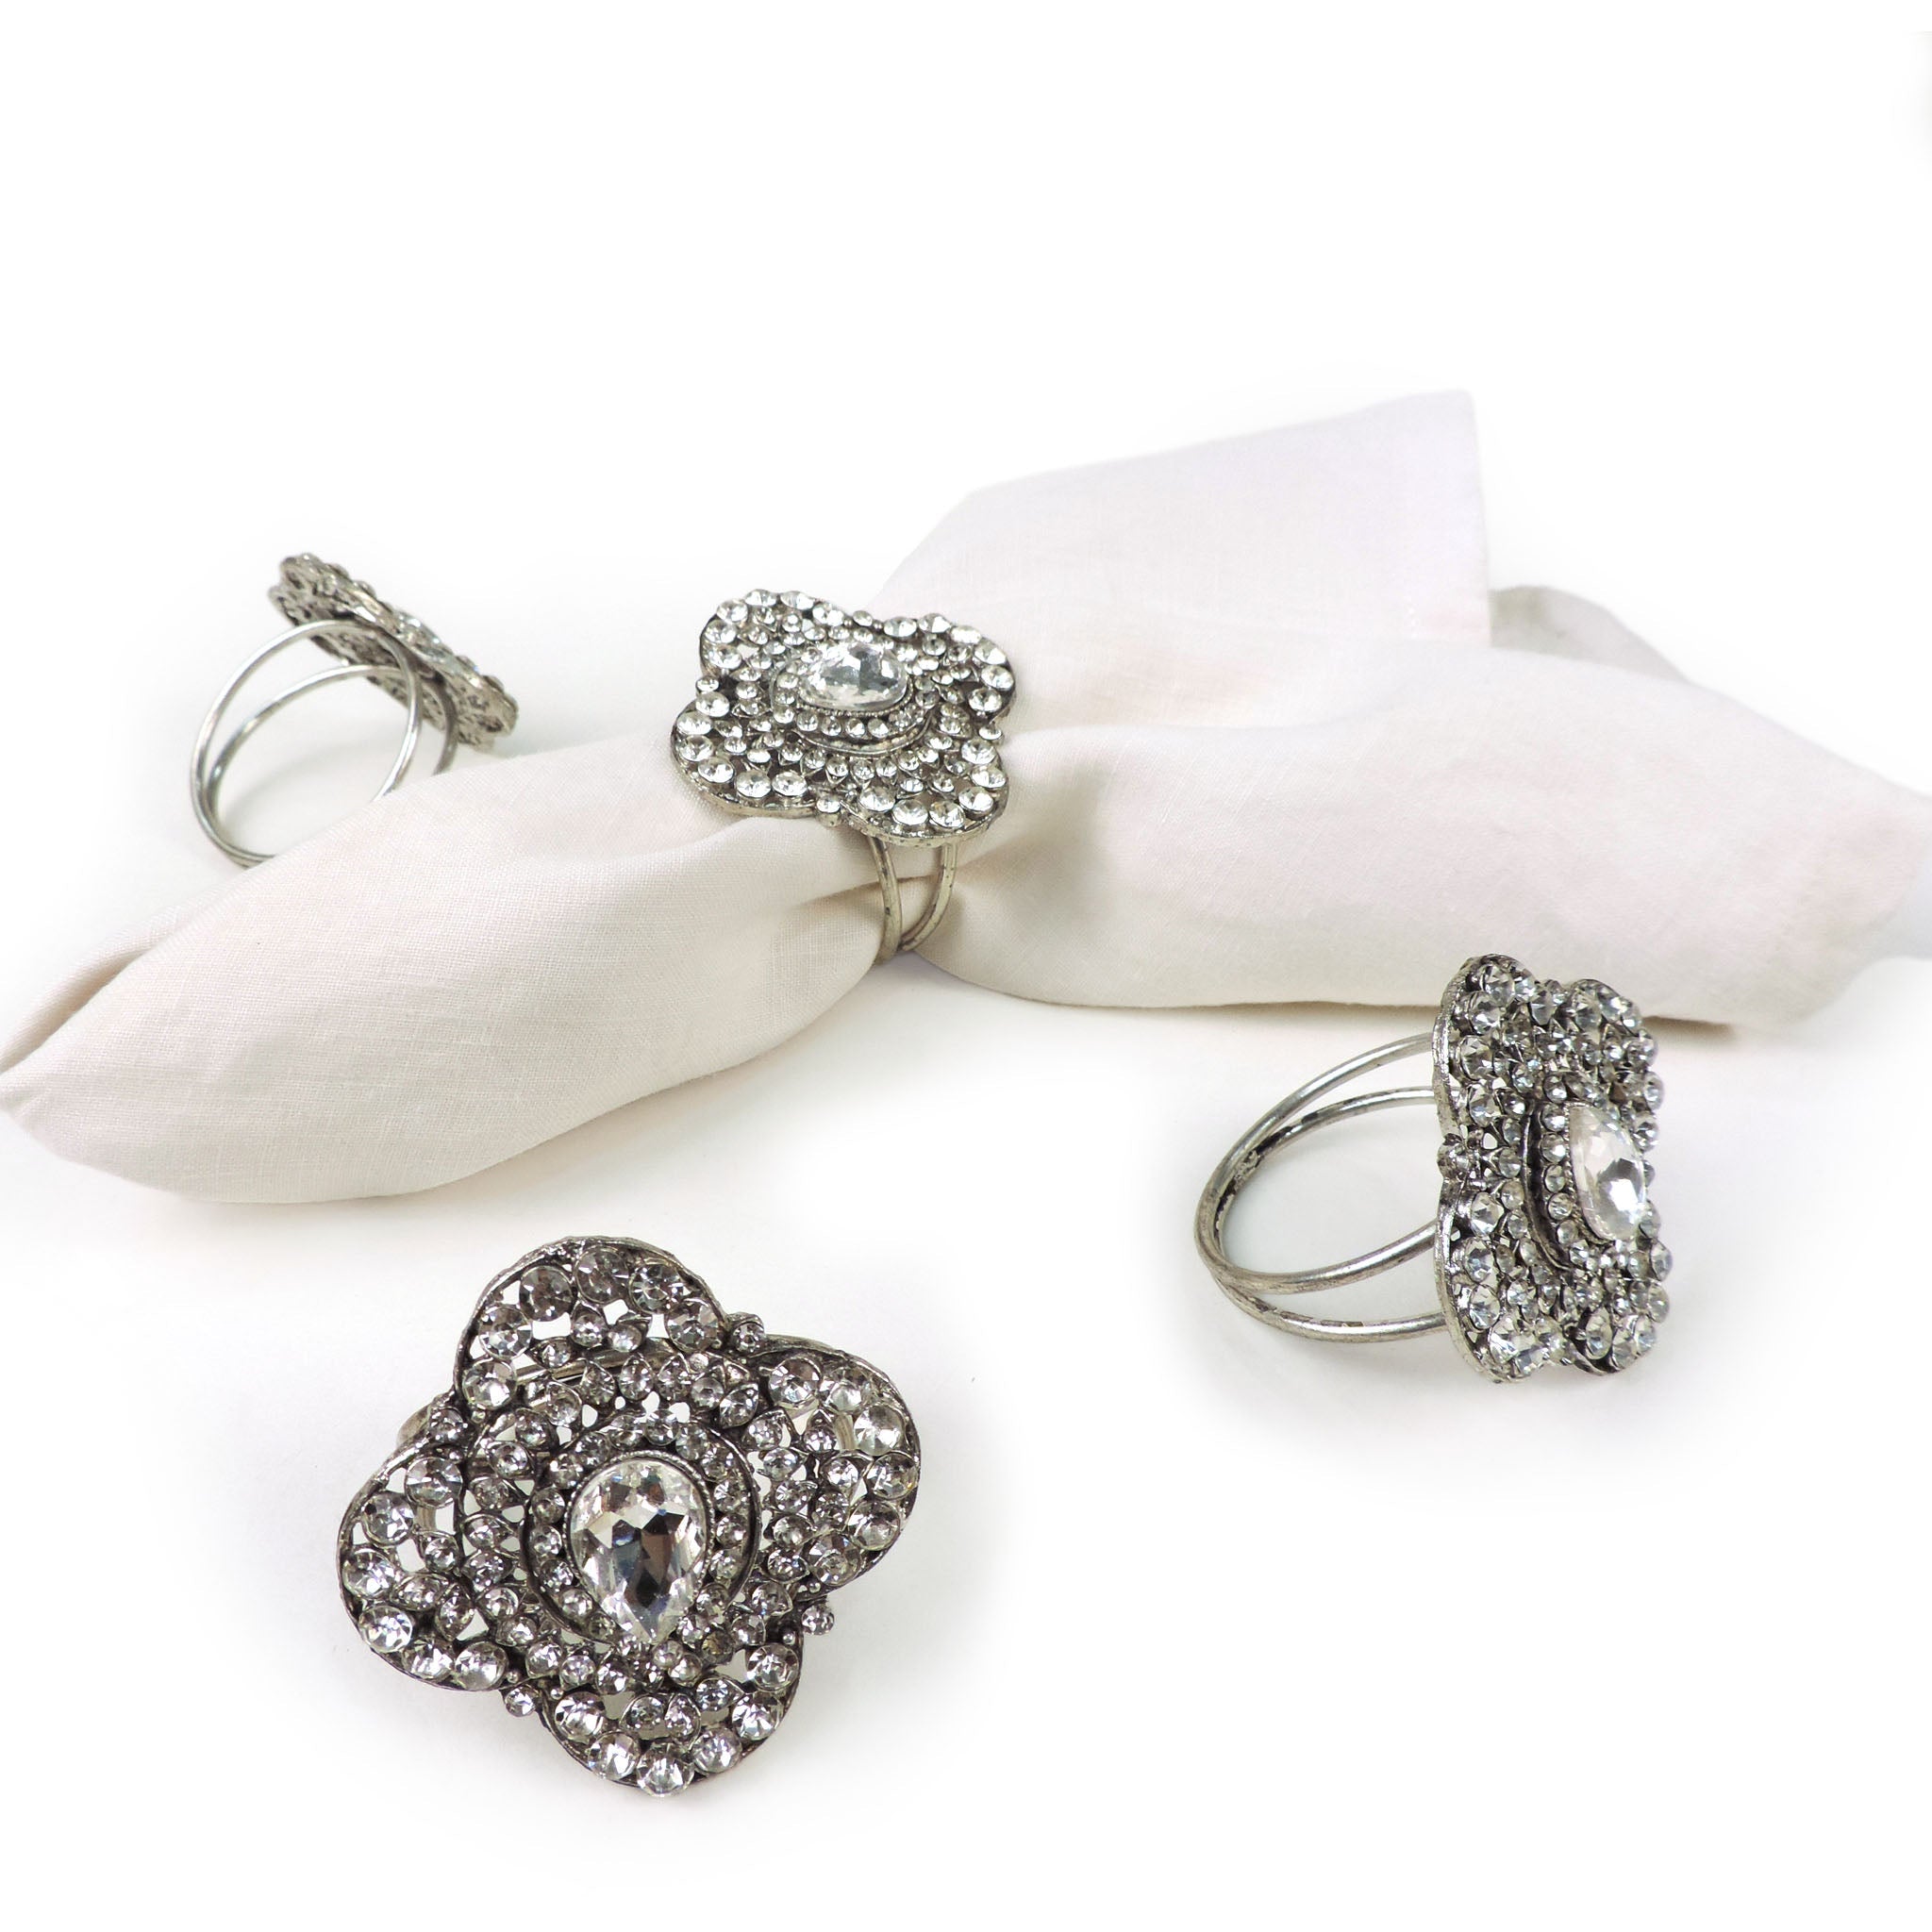 Bold & Beautiful Jeweled Napkin Ring<br>Color: Silver<br>Size: 2.20"x2"<br>Set of 4